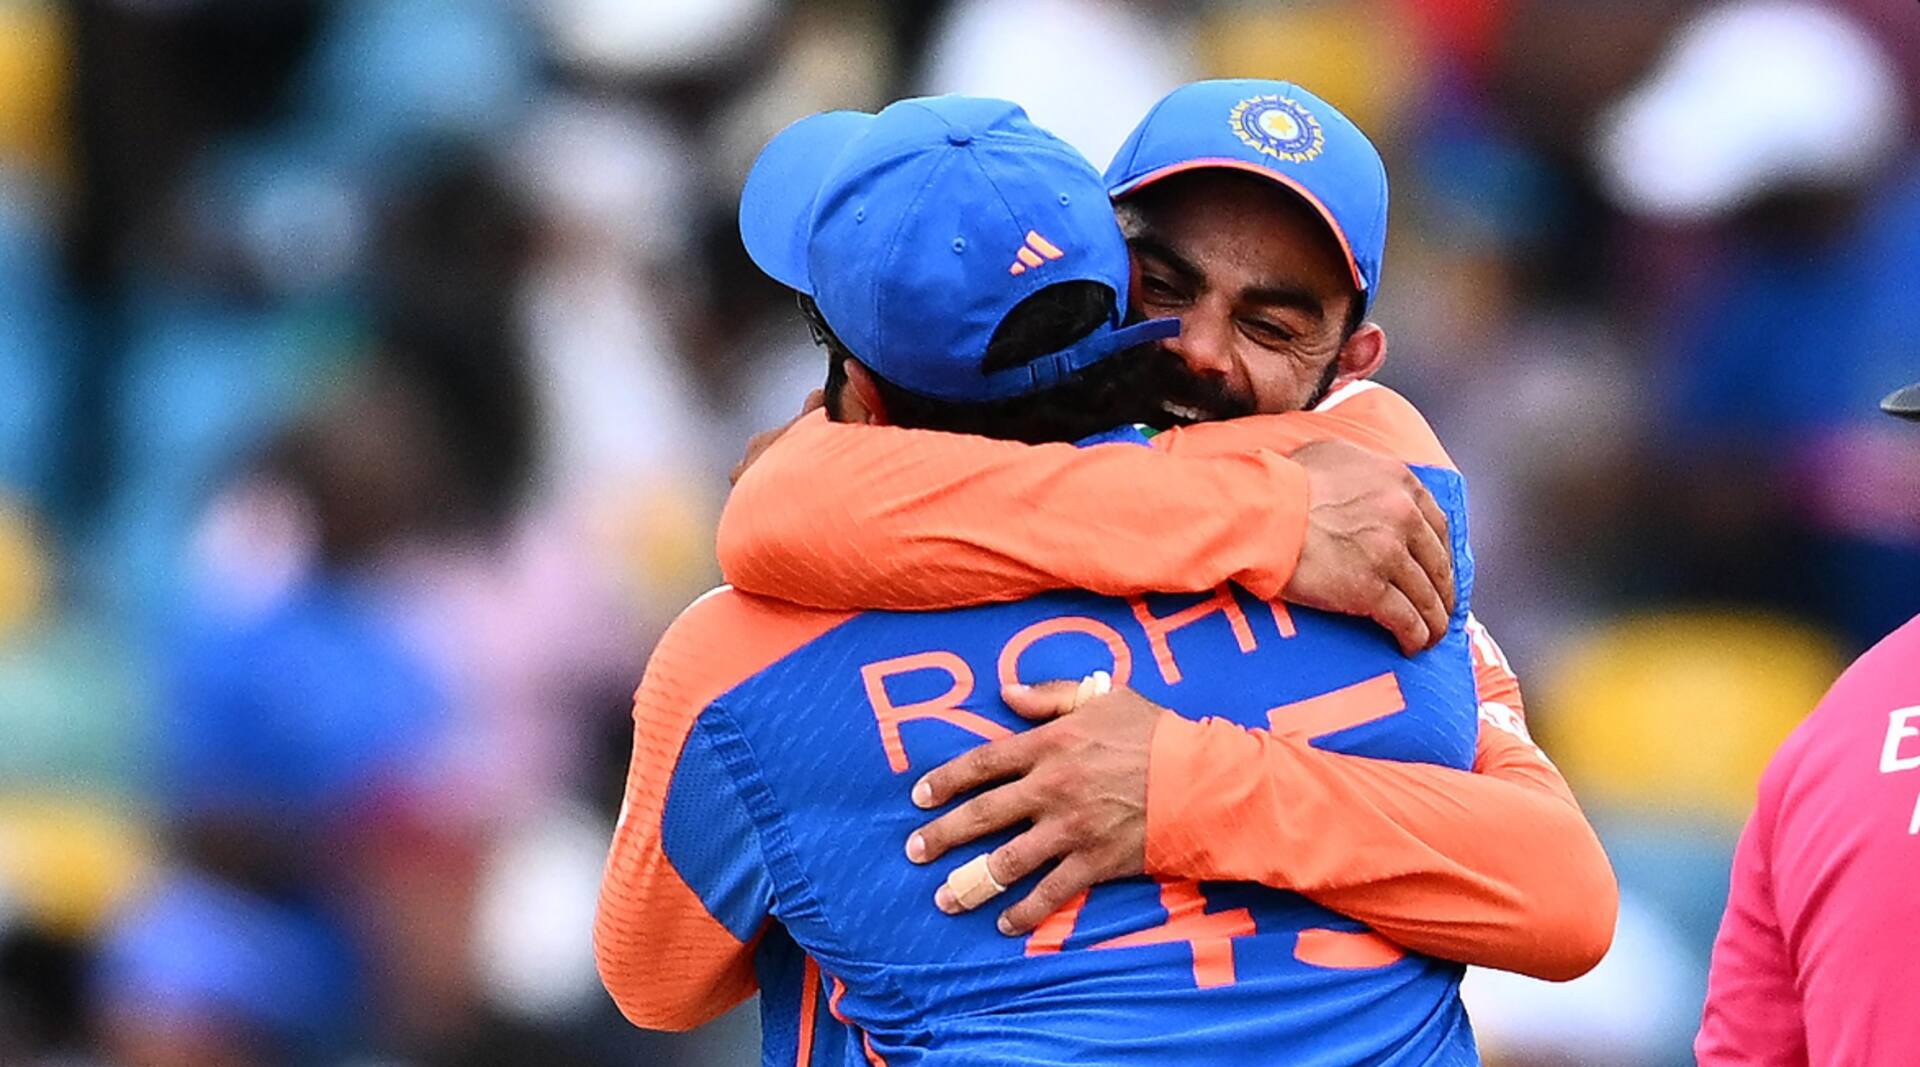 Rohit and Virat's Final Hurrah: India Wins T20 World Cup and Legends Announced Retirement